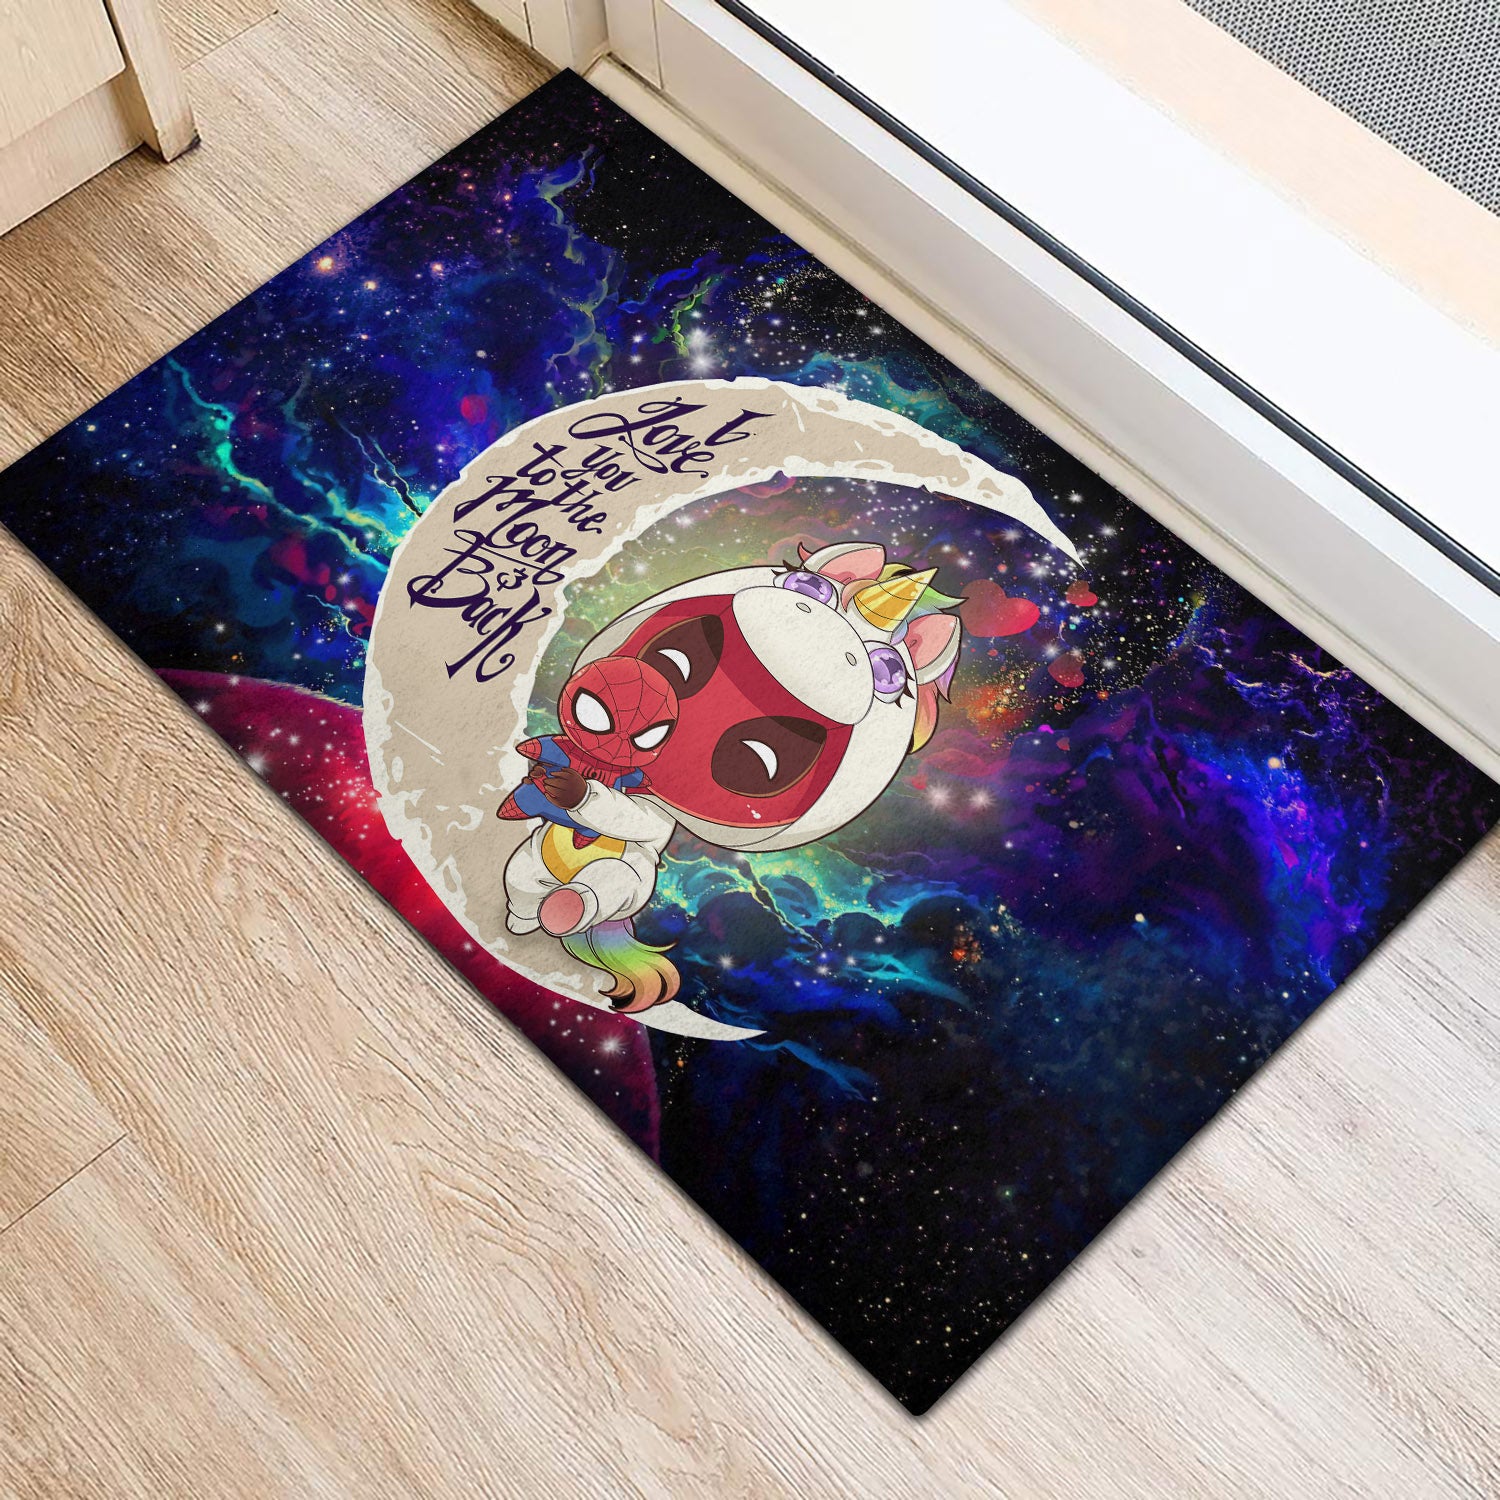 Unicorn Deadpool And Spiderman Avenger Love You To The Moon Galaxy Back Door Mats Home Decor